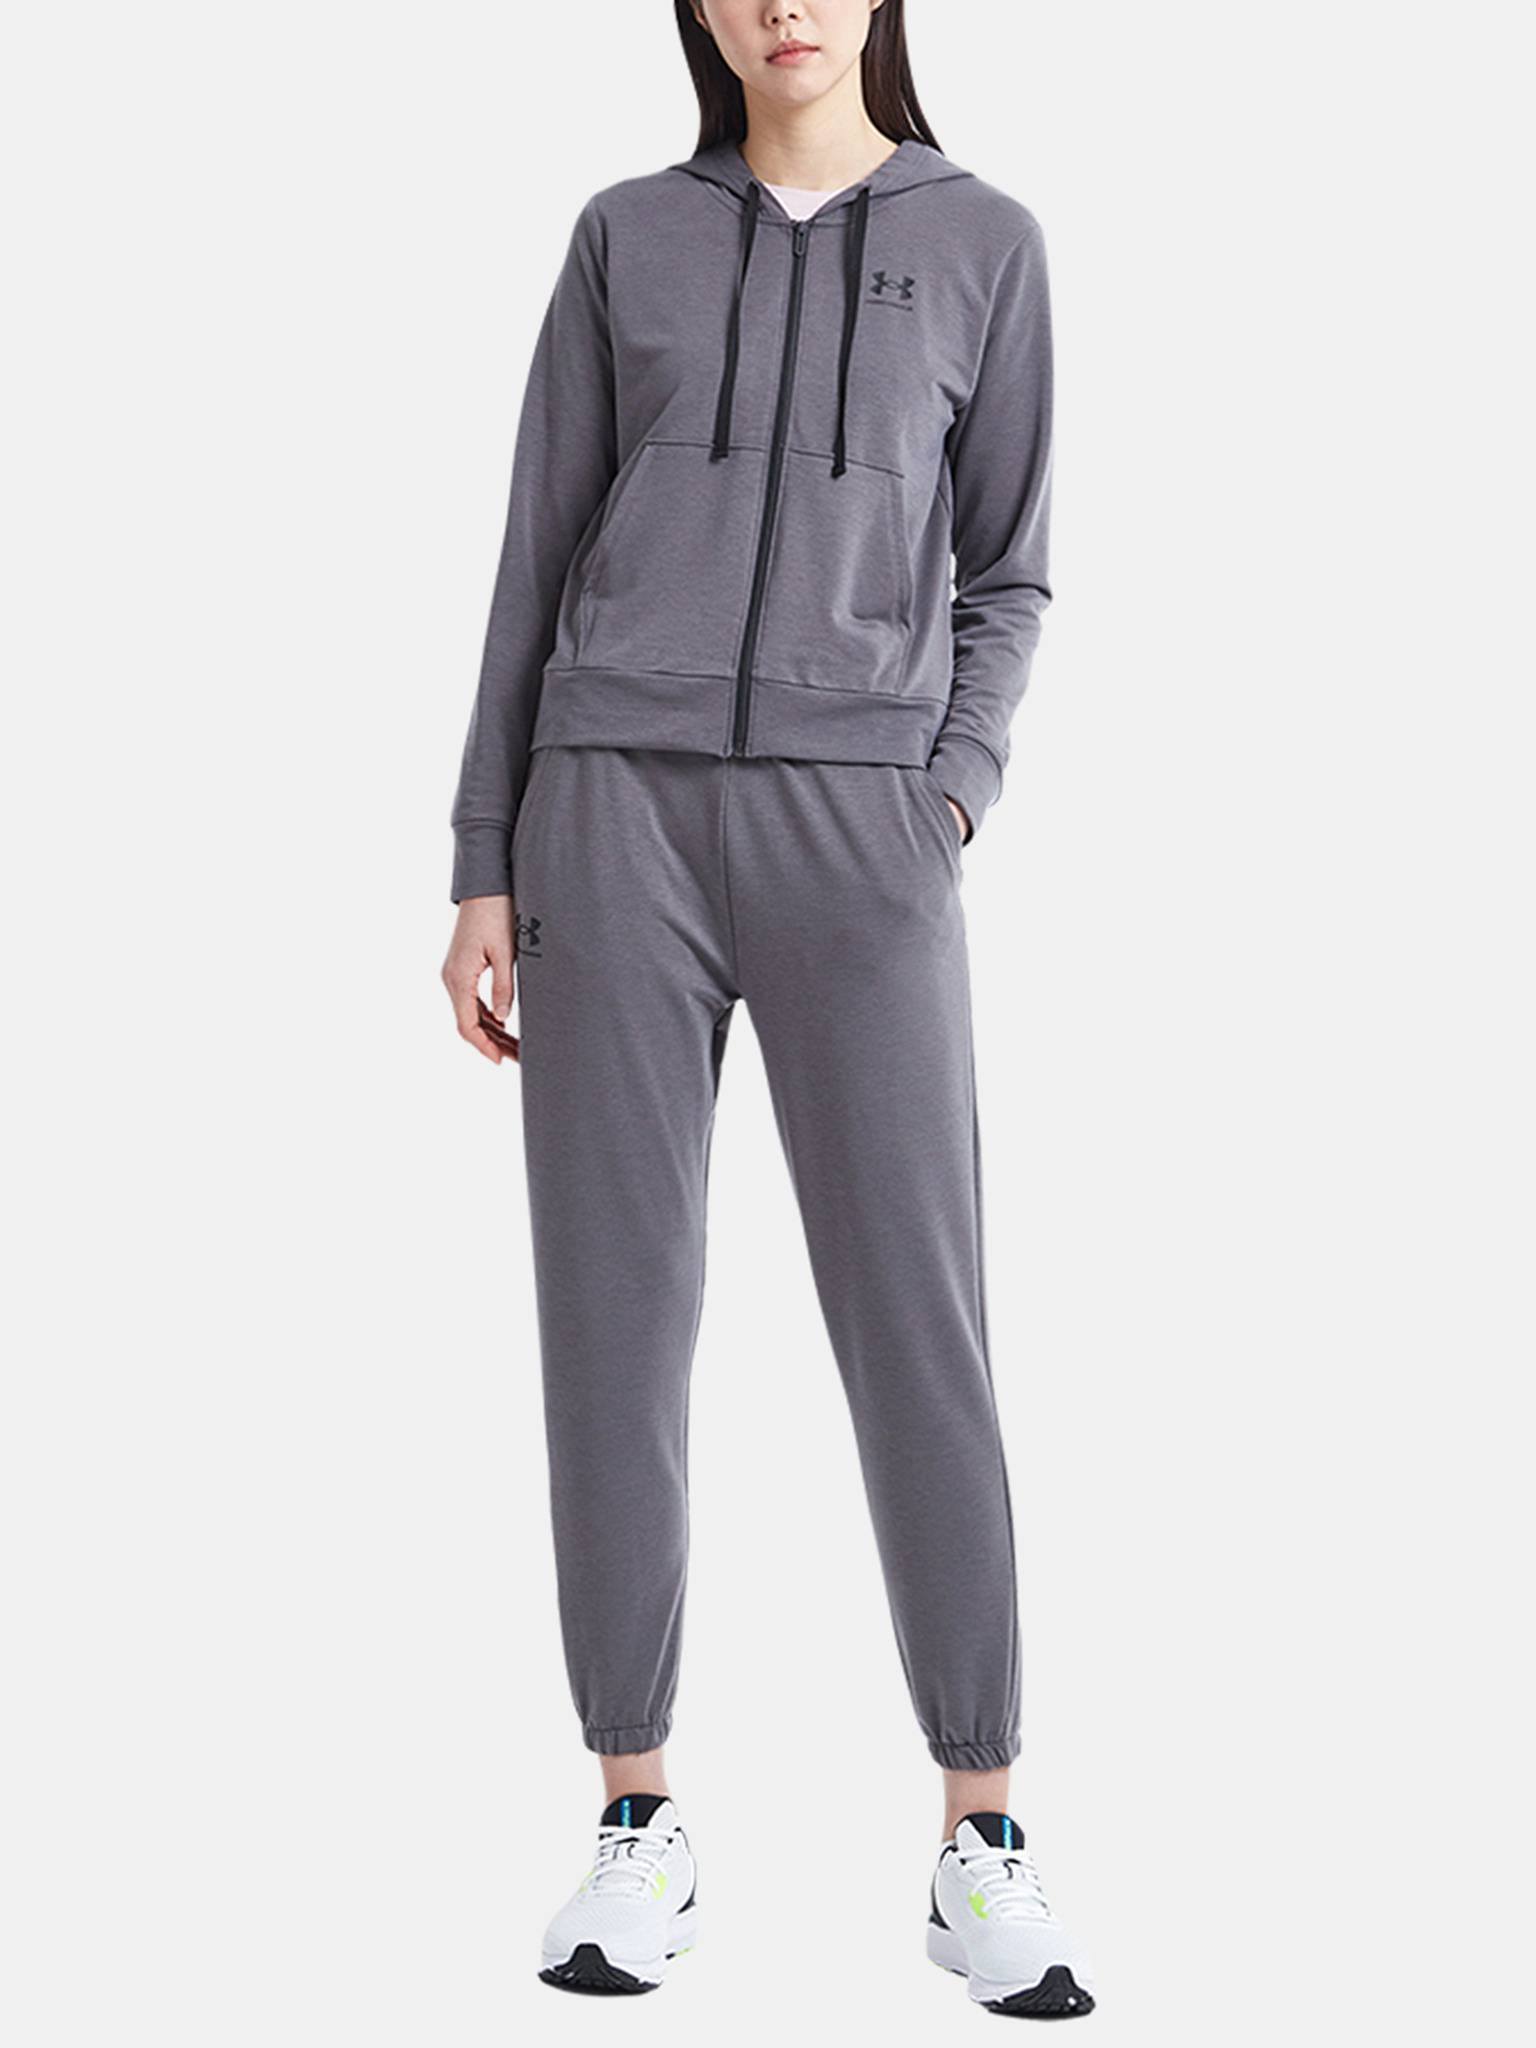 Under Armour - Rival Terry Jogger Sweatpants